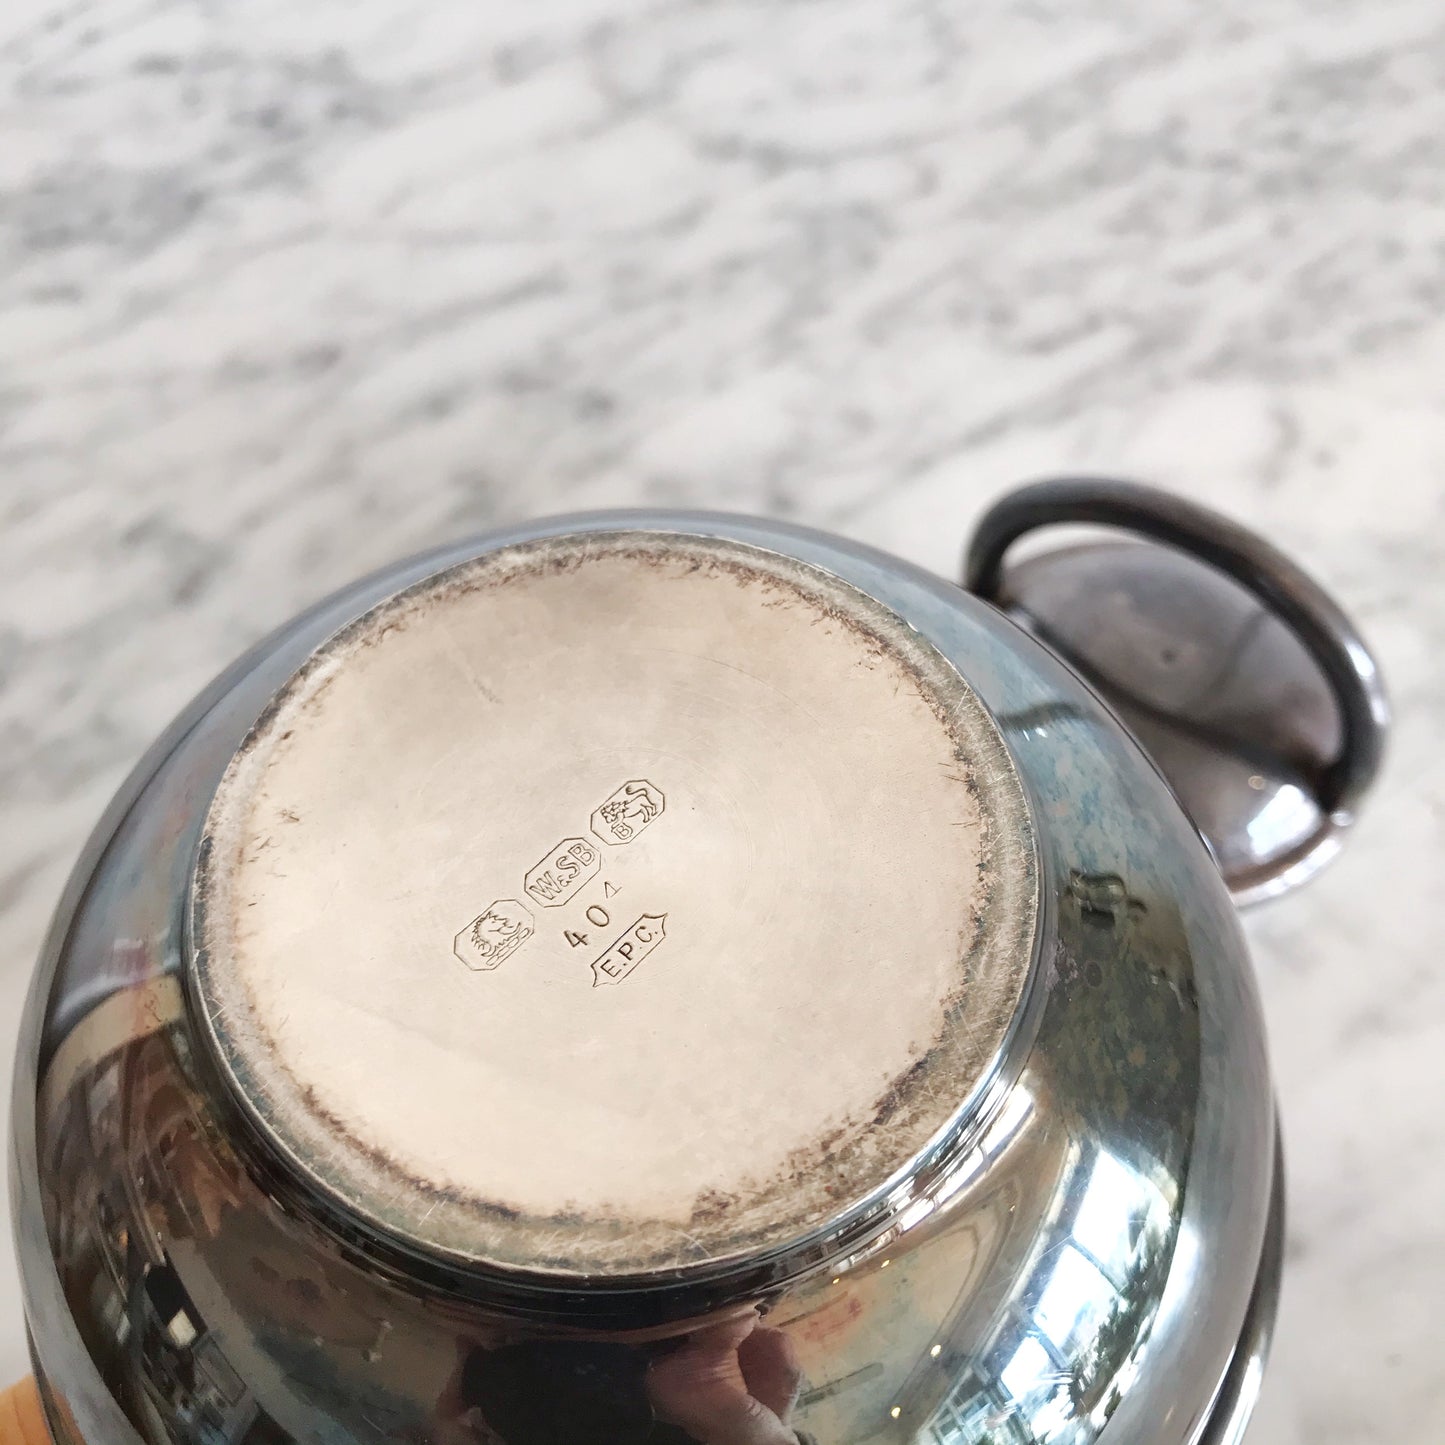 Vintage Silver Teapot with Wrapped Handle